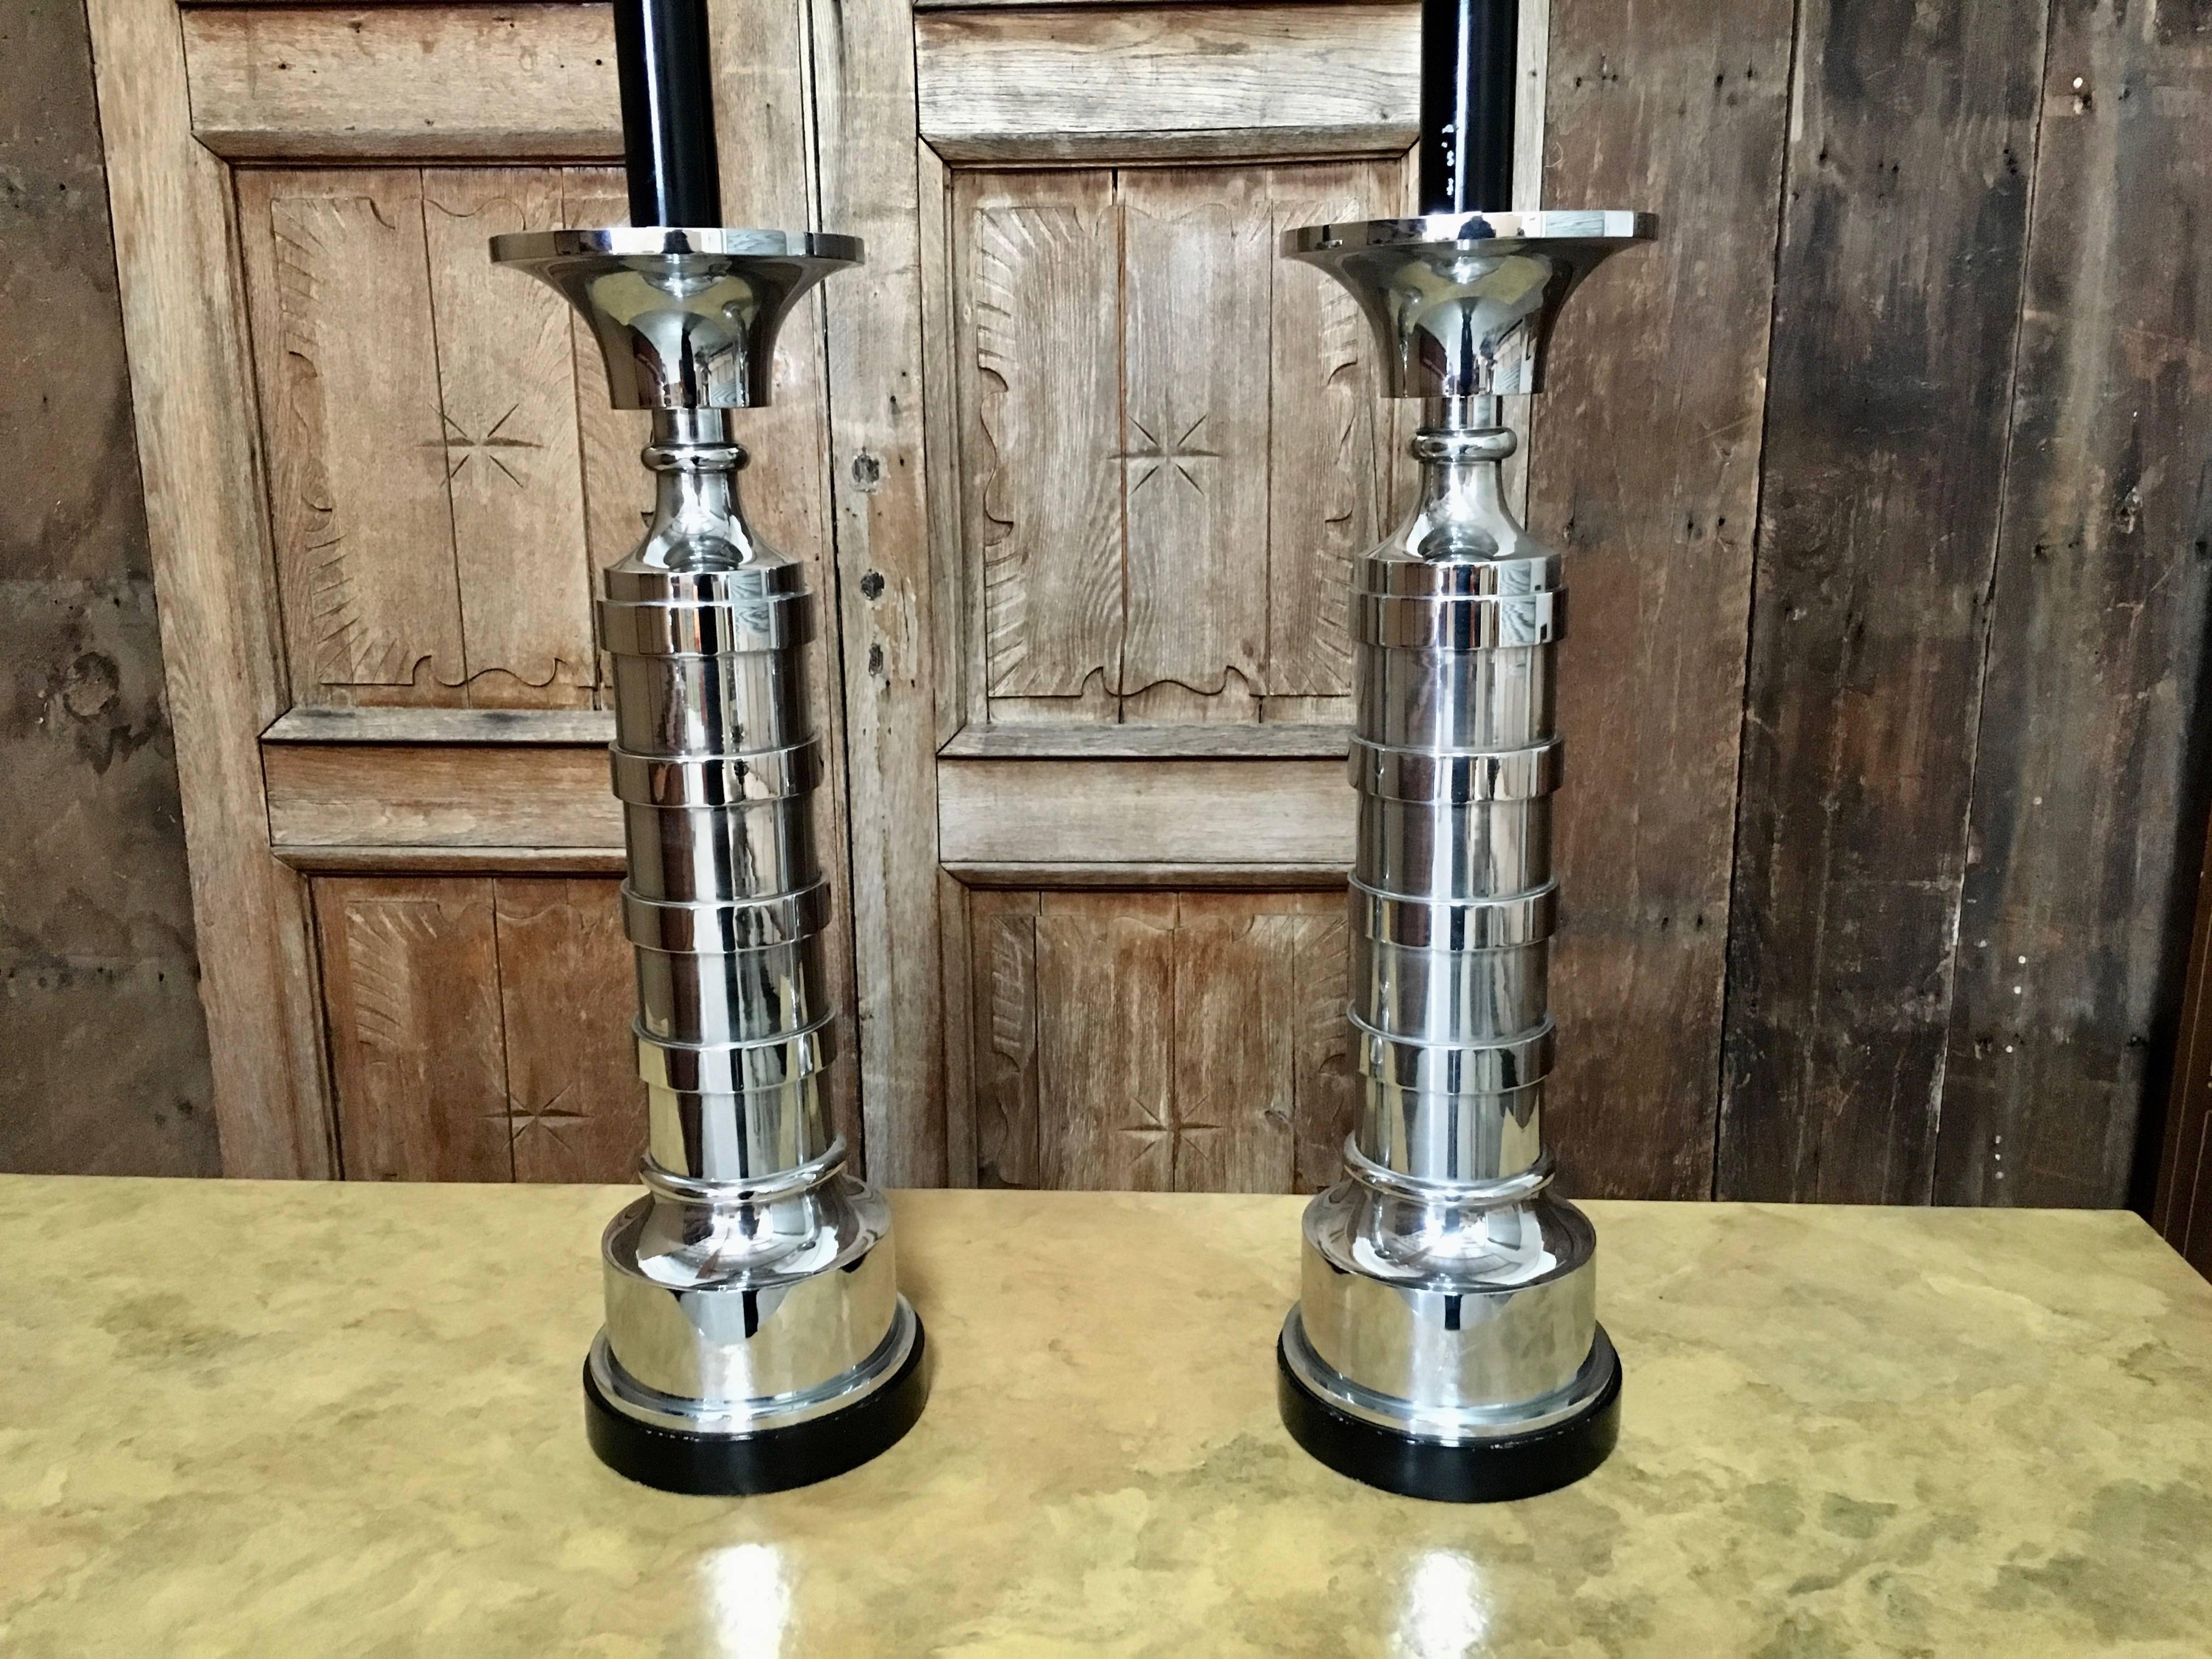 Large pair of Mid-Century Modernist chrome lamps on black wood base
the base is 7